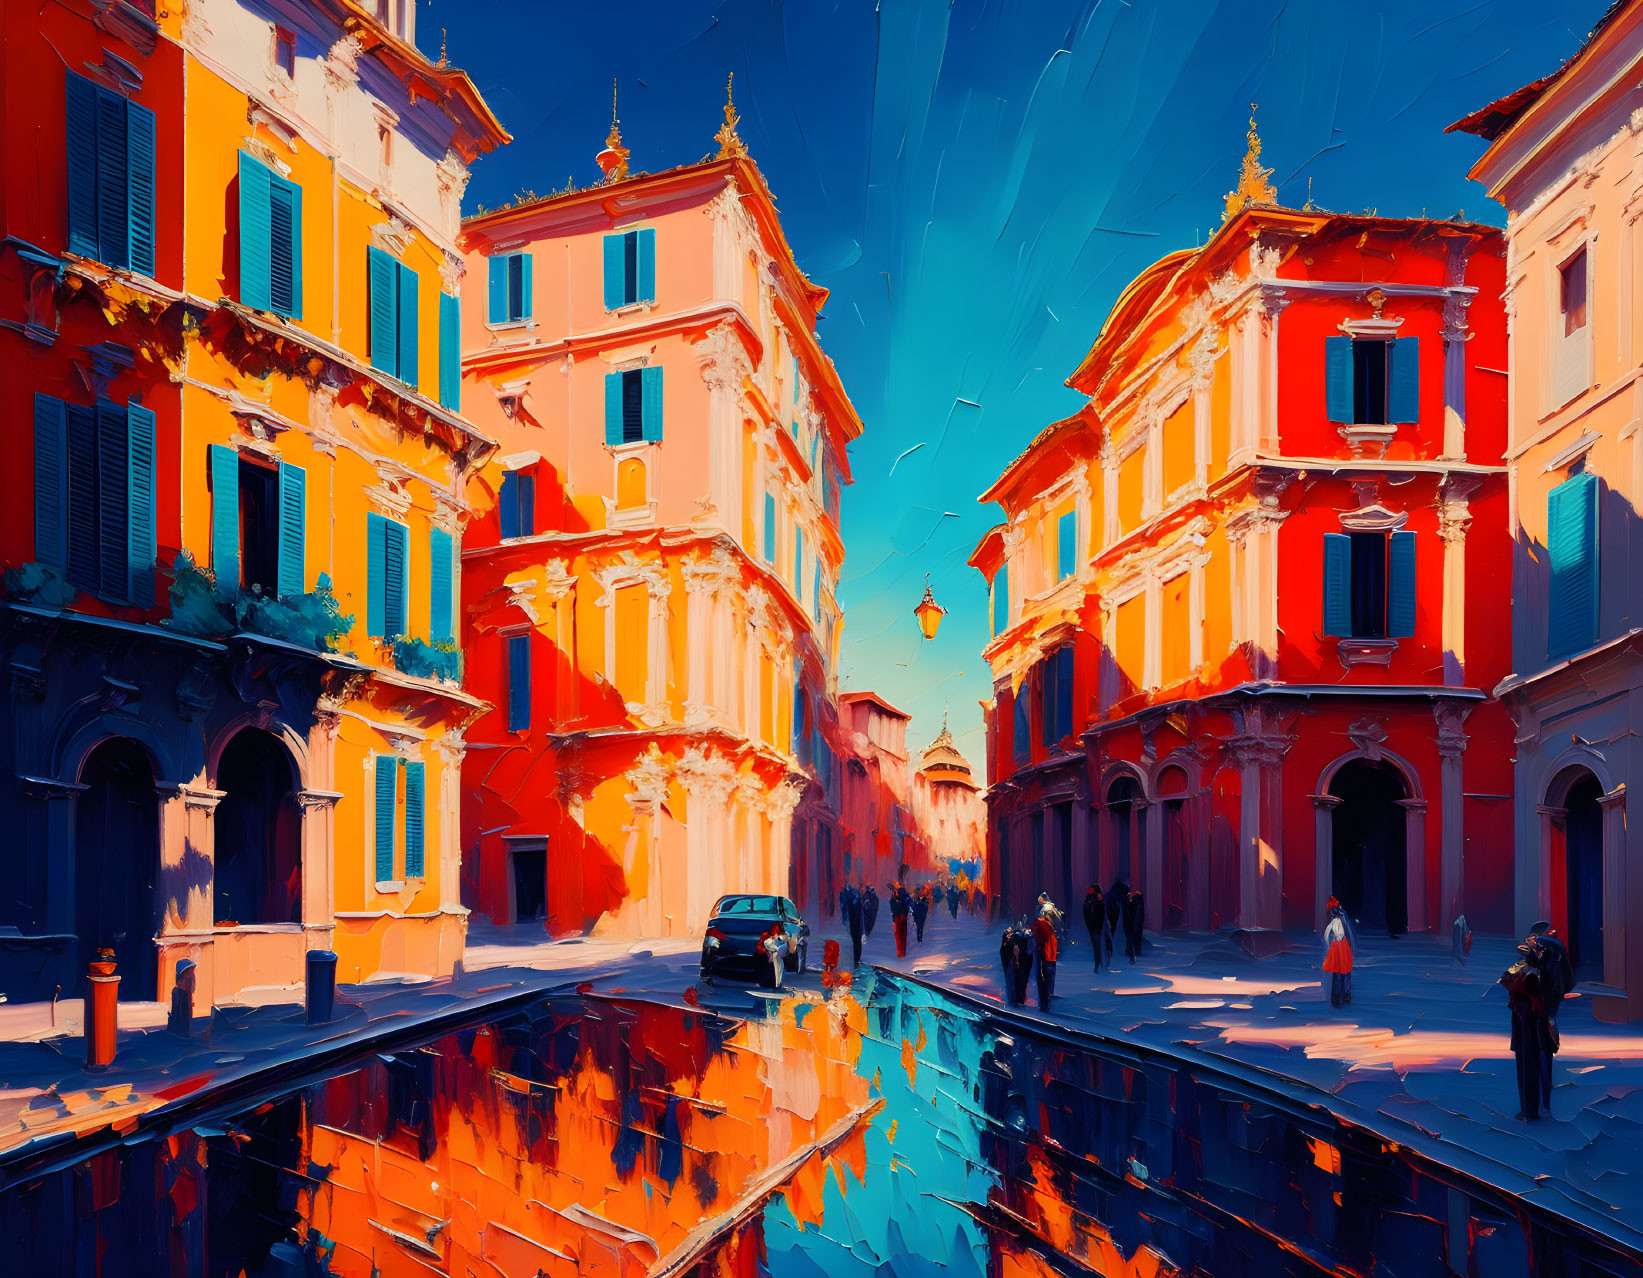 Colorful street scene with buildings, people, car, and blue sky in dynamic brushstrokes